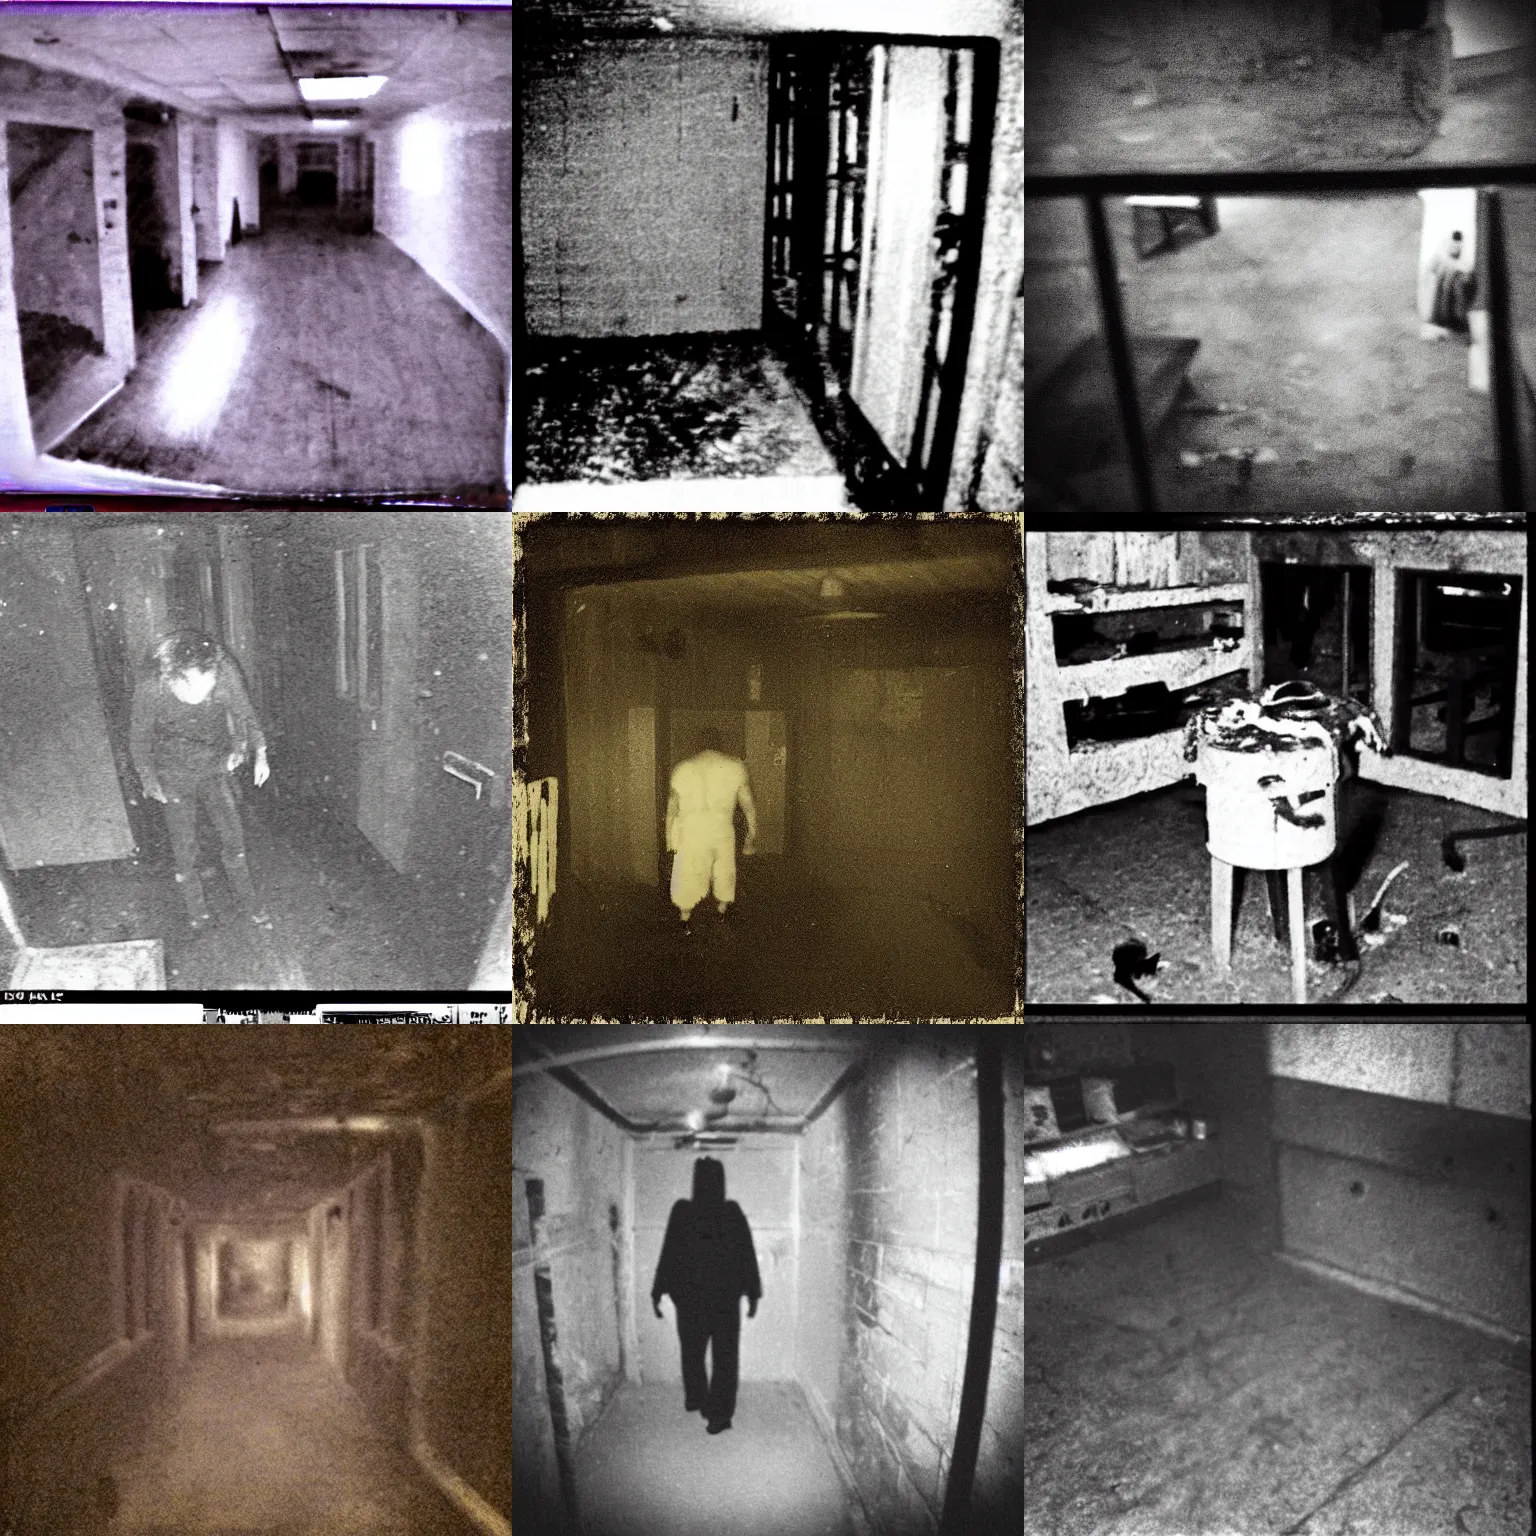 Prompt: “CCTV footage of a basement demon, found footage, horror, unsettling, grainy”